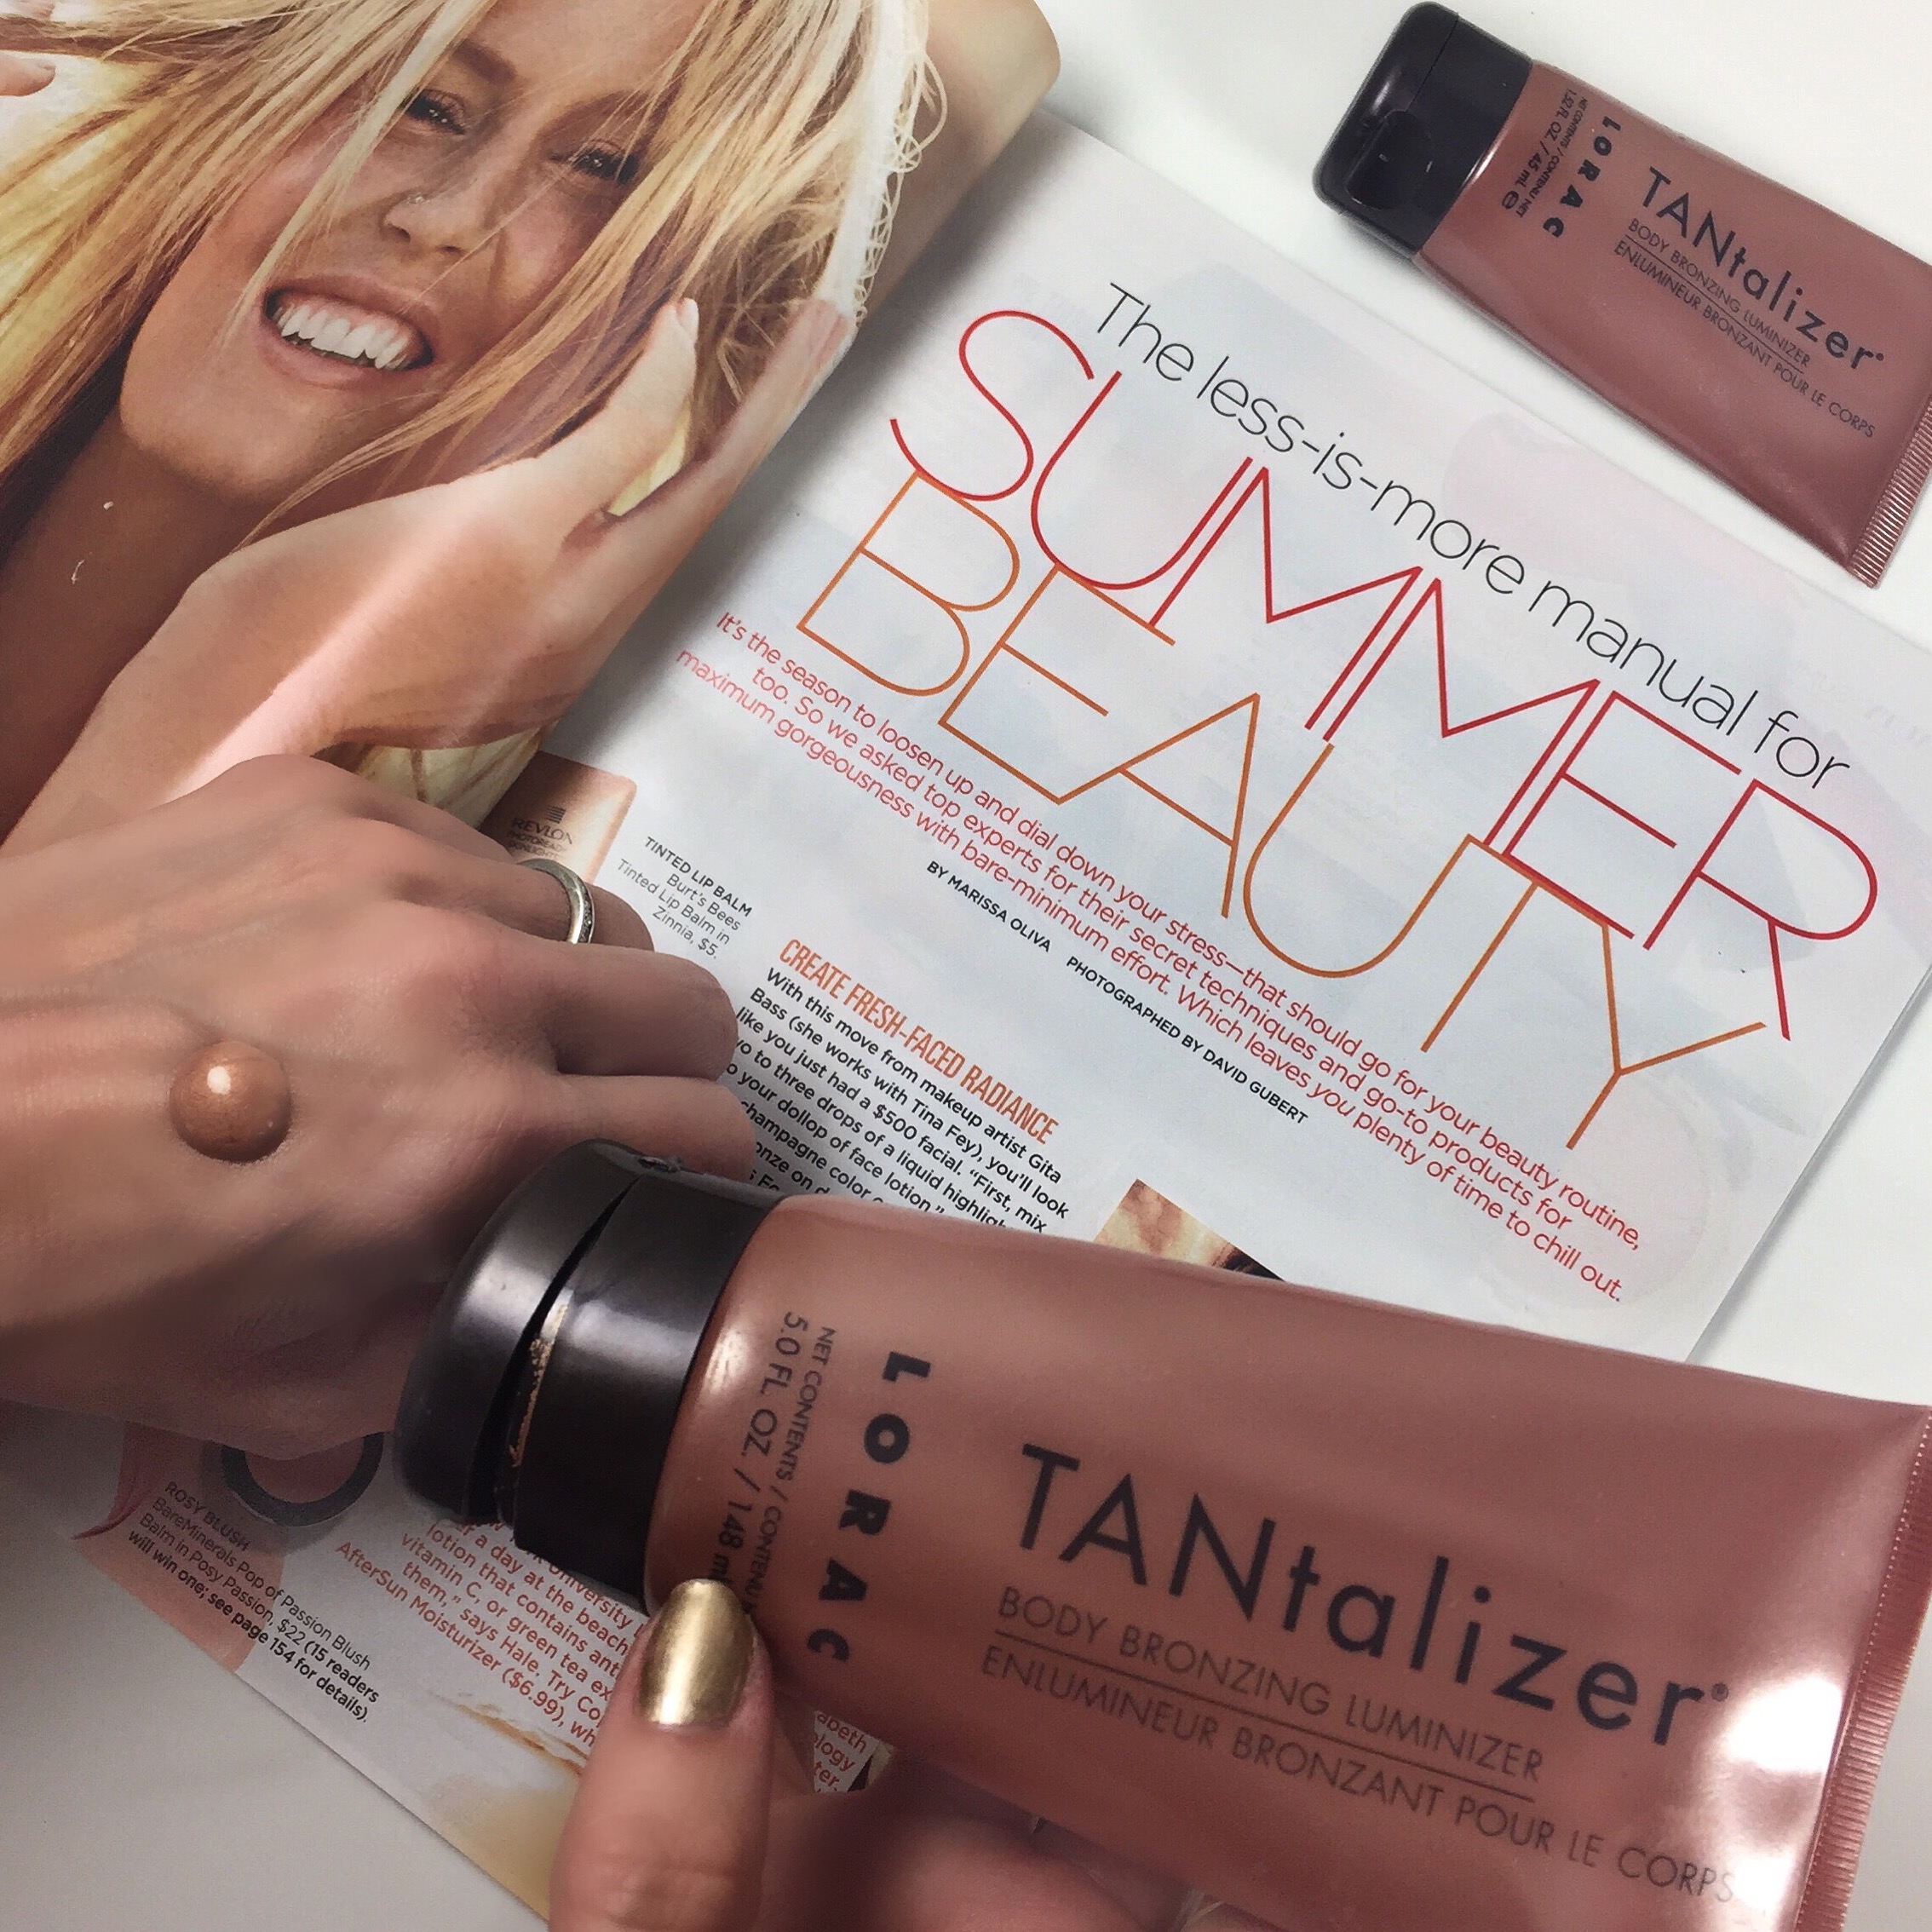 2 Summer Beauty Trends To Try Now : Bronze Glowing Skin + Hot Red Lips